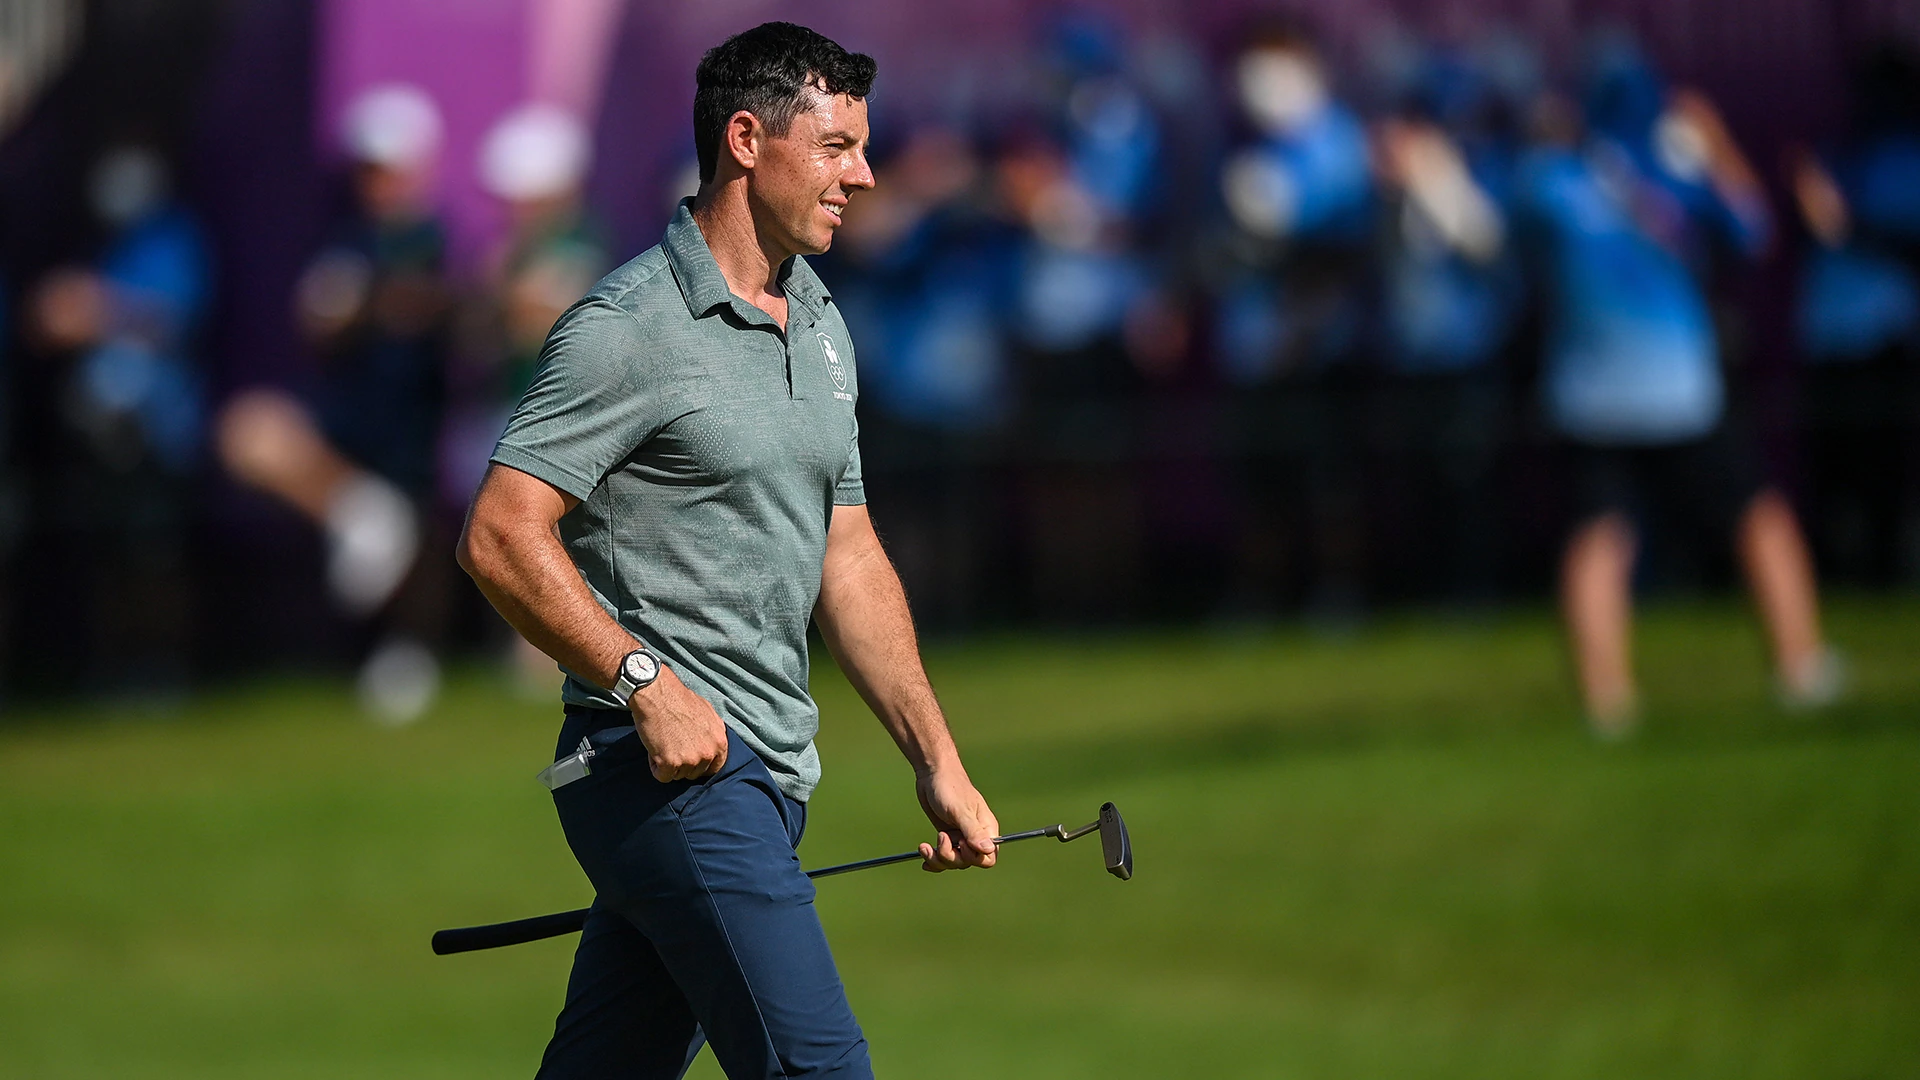 2021 Olympics: Rory McIlroy: ‘I never tried so hard in my life to finish third’